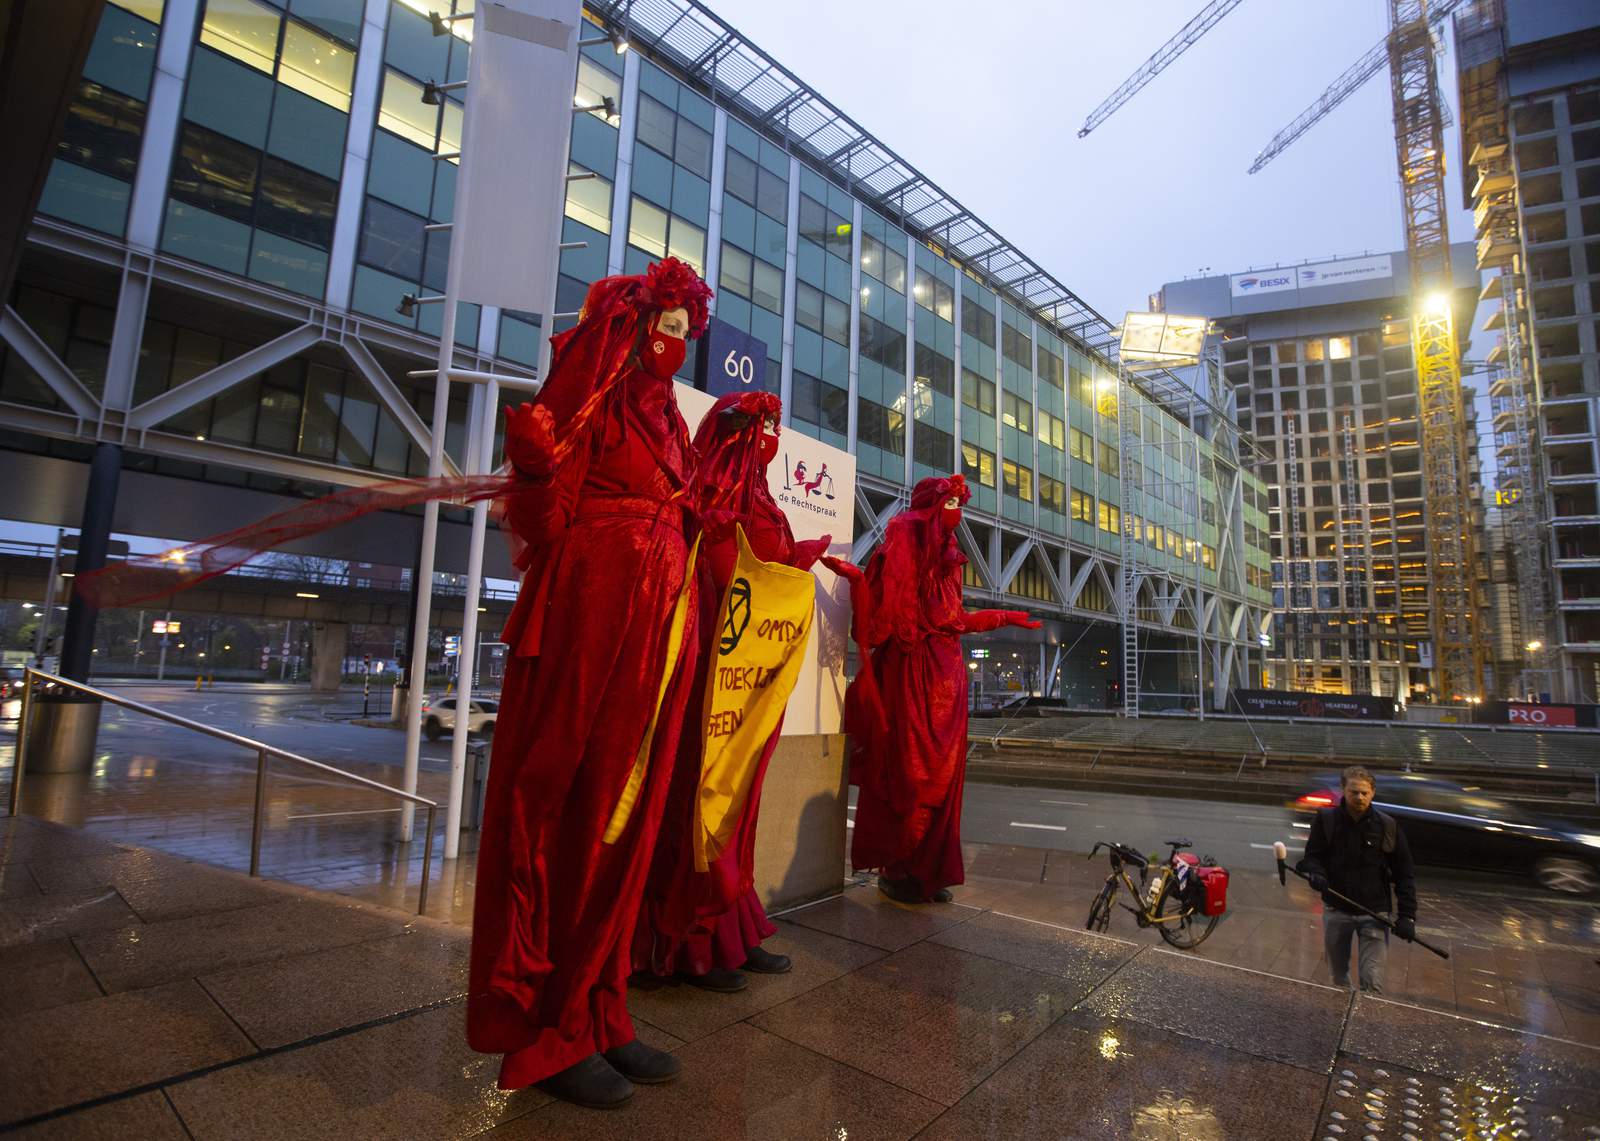 Dutch climate activists take Shell to court over emissions